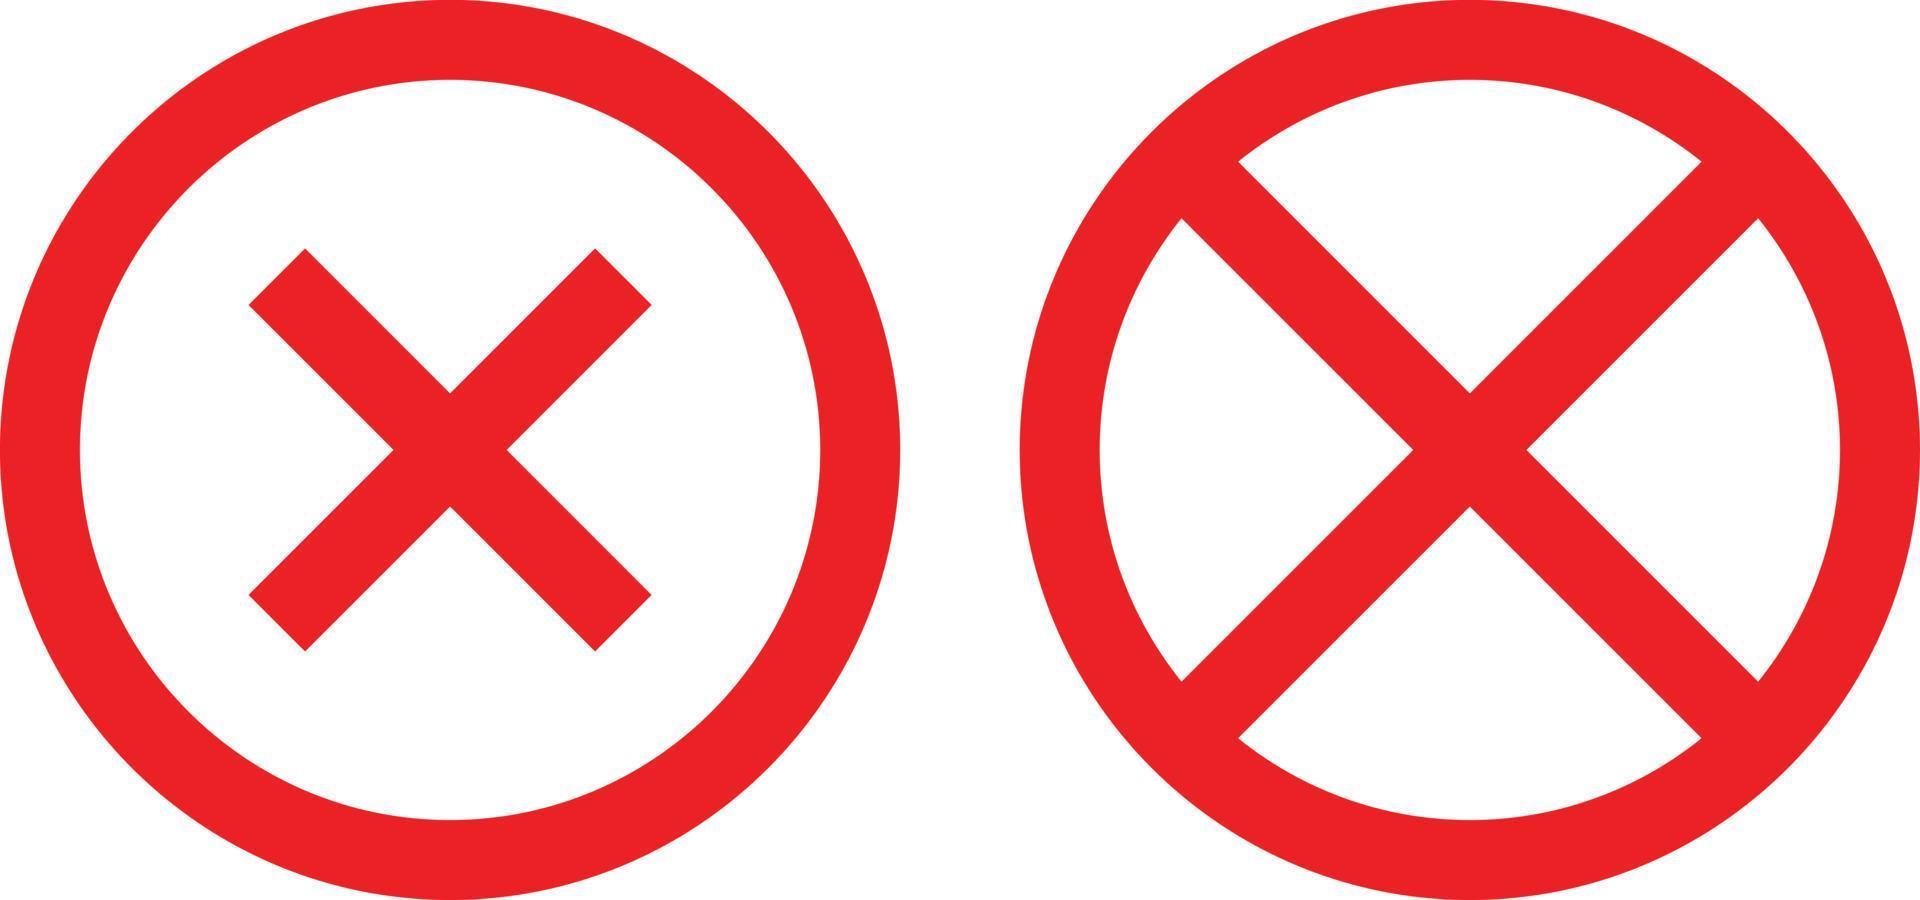 Two Cross Symbol in Circle Shape. Restriction Sign Icons. Prohibition Symbol Set. vector